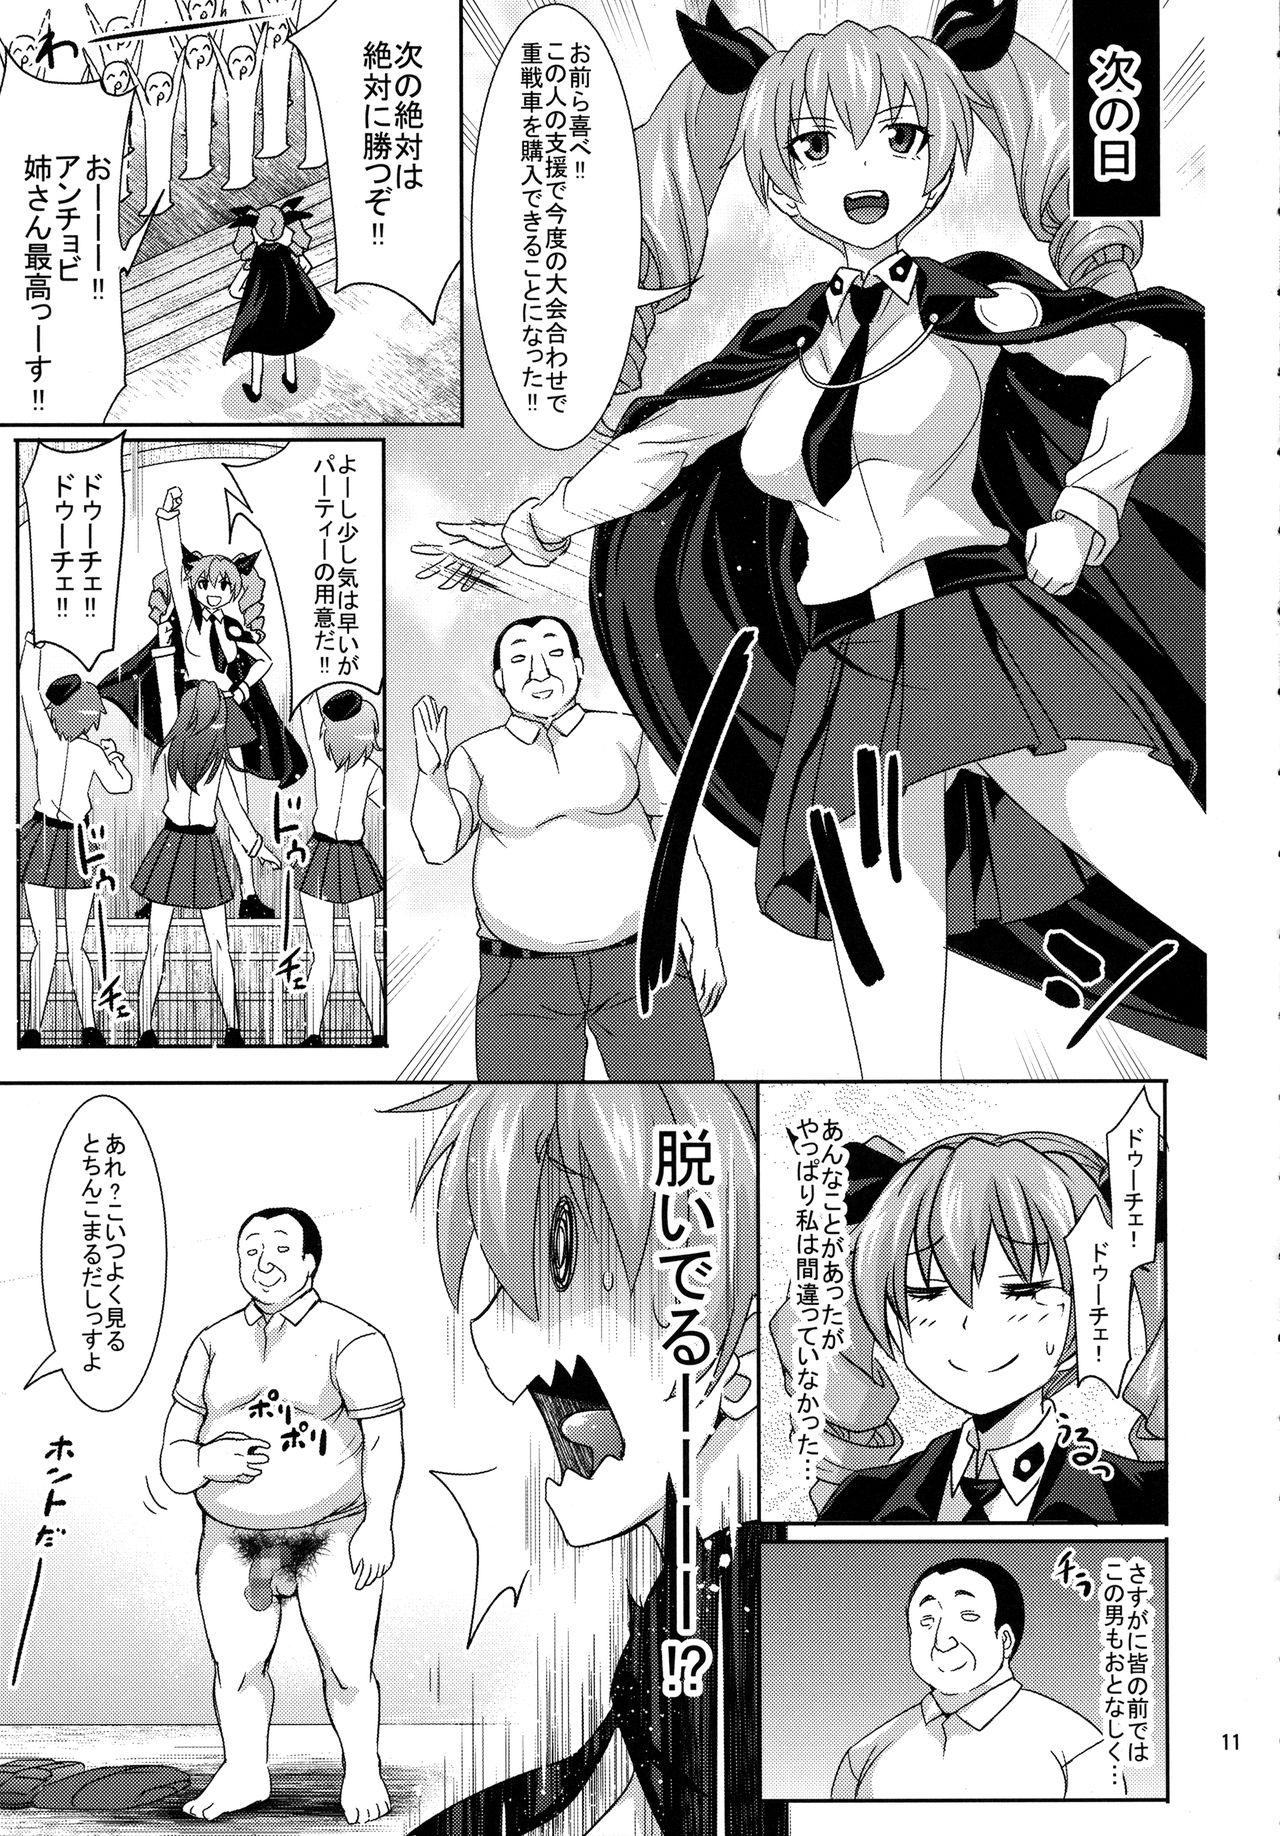 Workout Anchovy to Duce! Duce! - Girls und panzer Closeup - Page 10